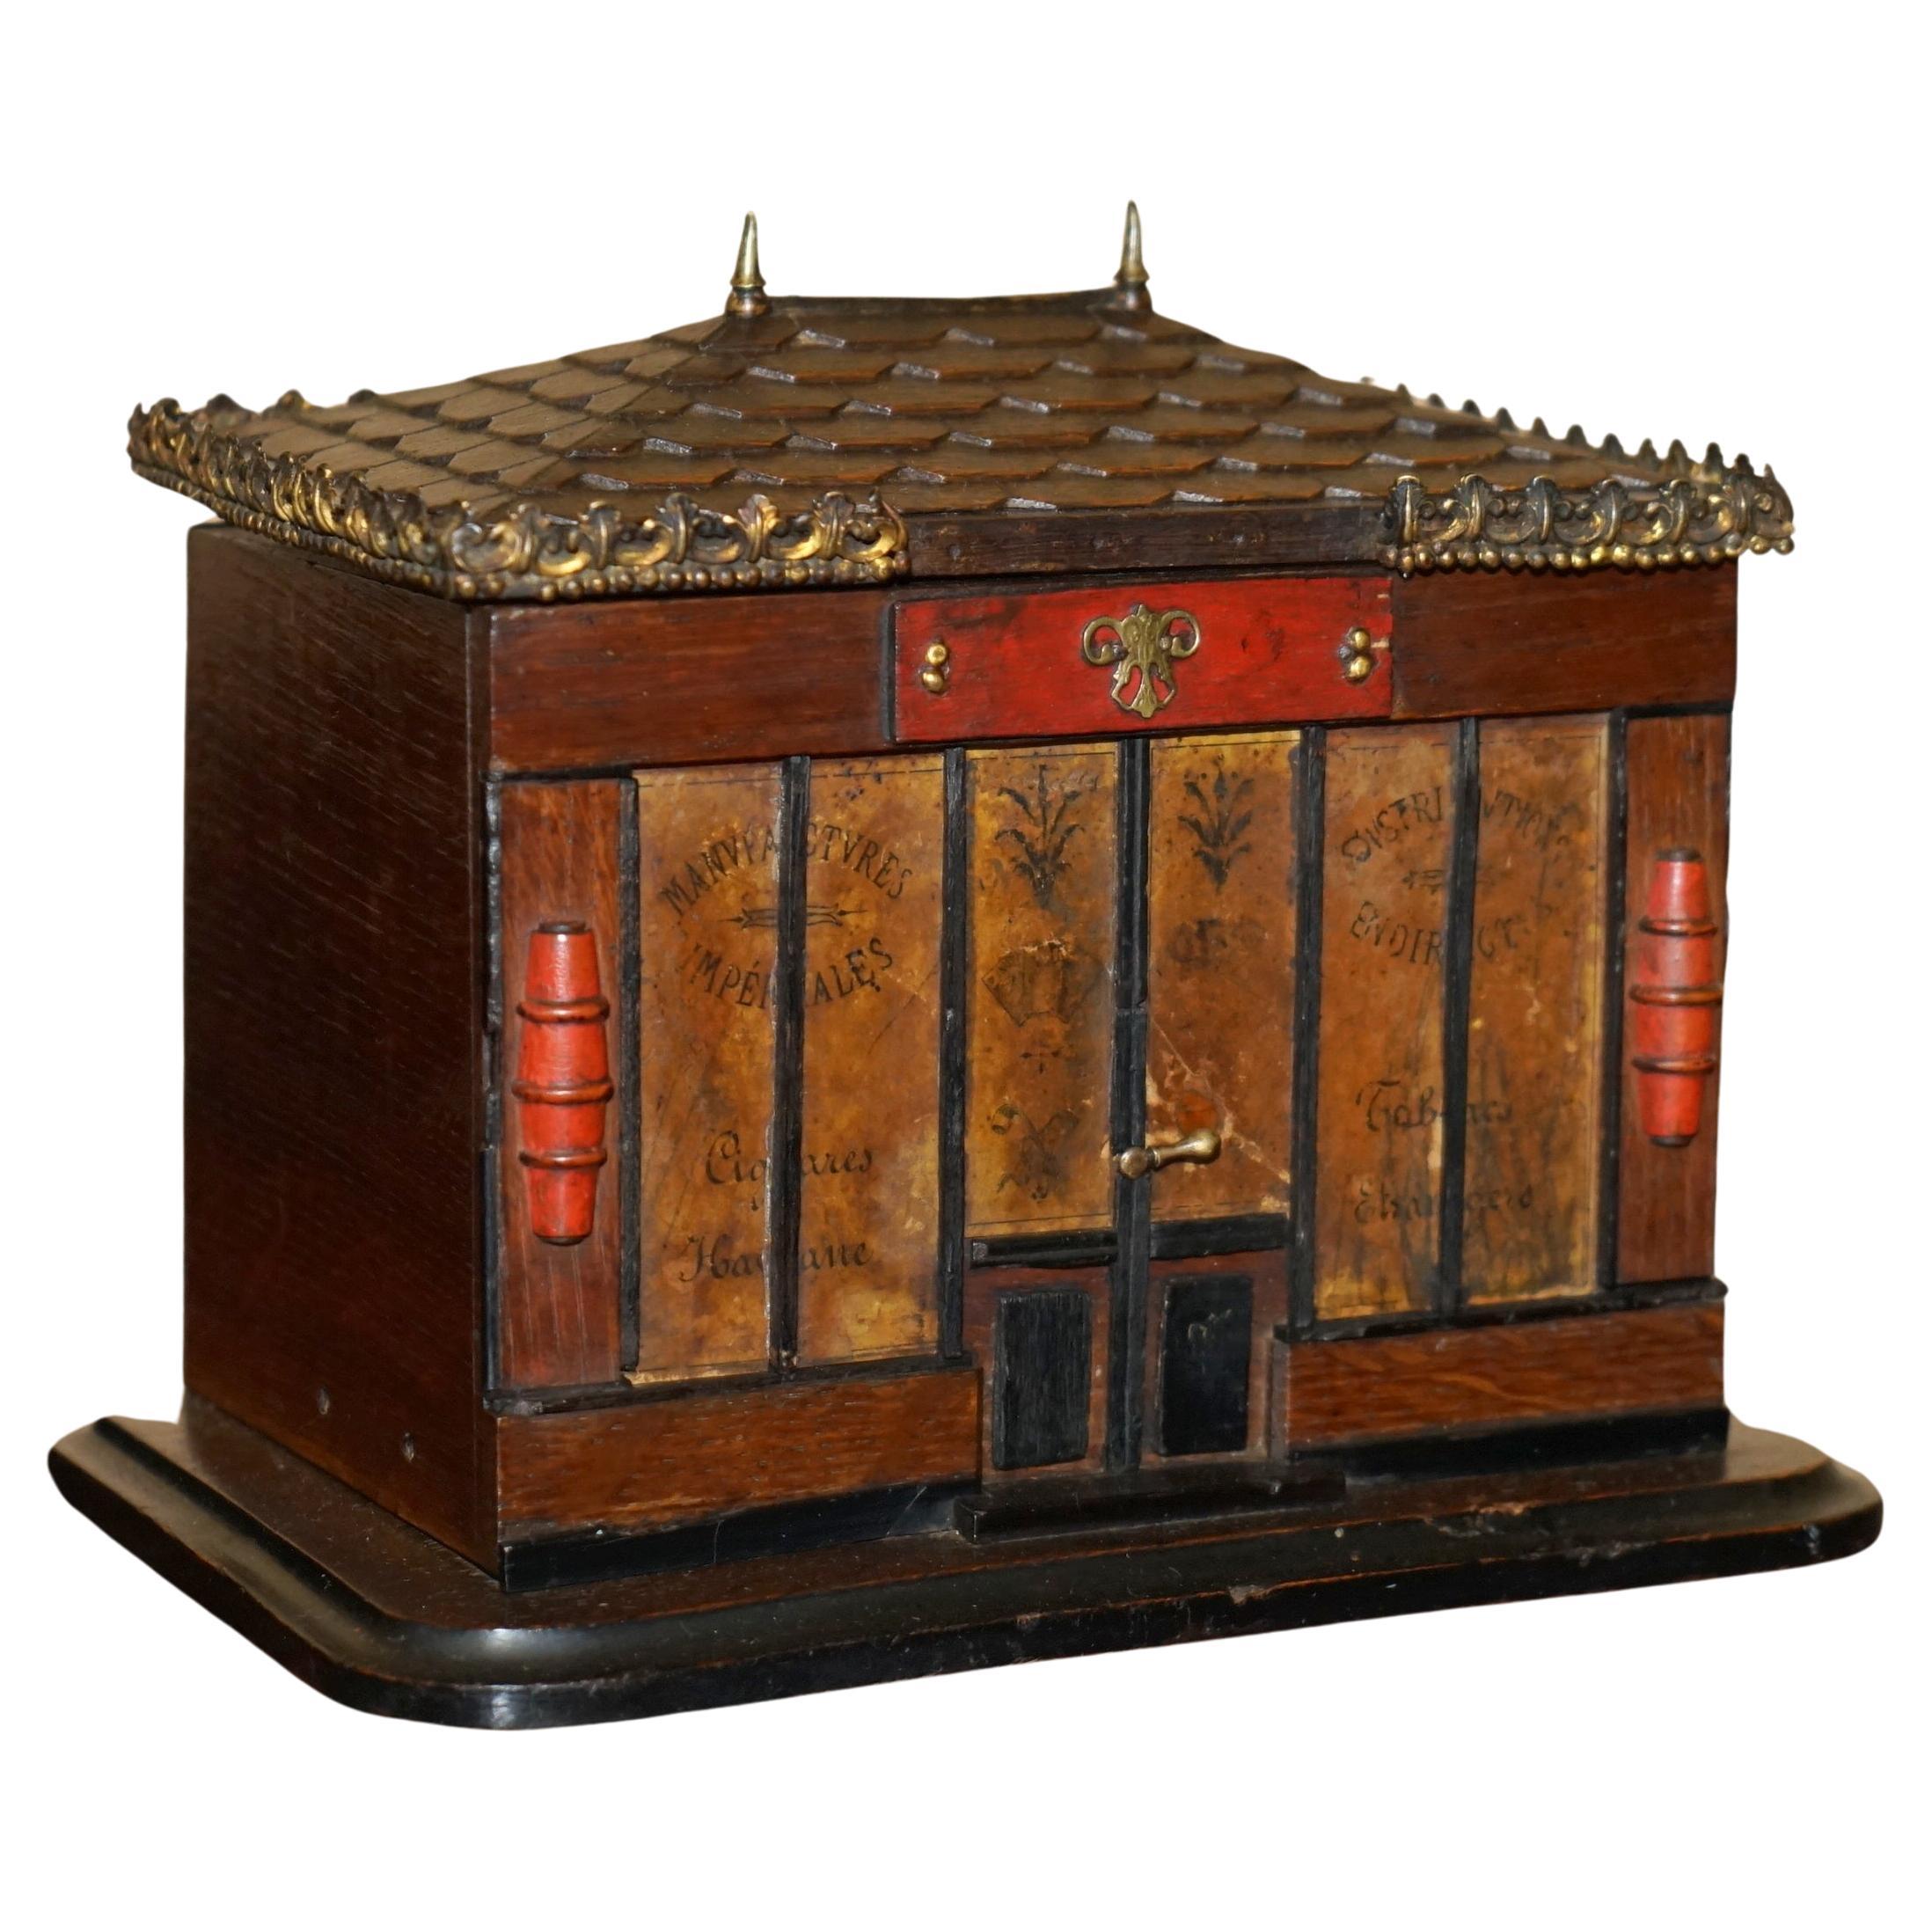 ANTIQUE CIRCA 1900 FRENCH CIGAR BOX MODELLED AS A PAGODA TOP CHiNESE SHOP For Sale